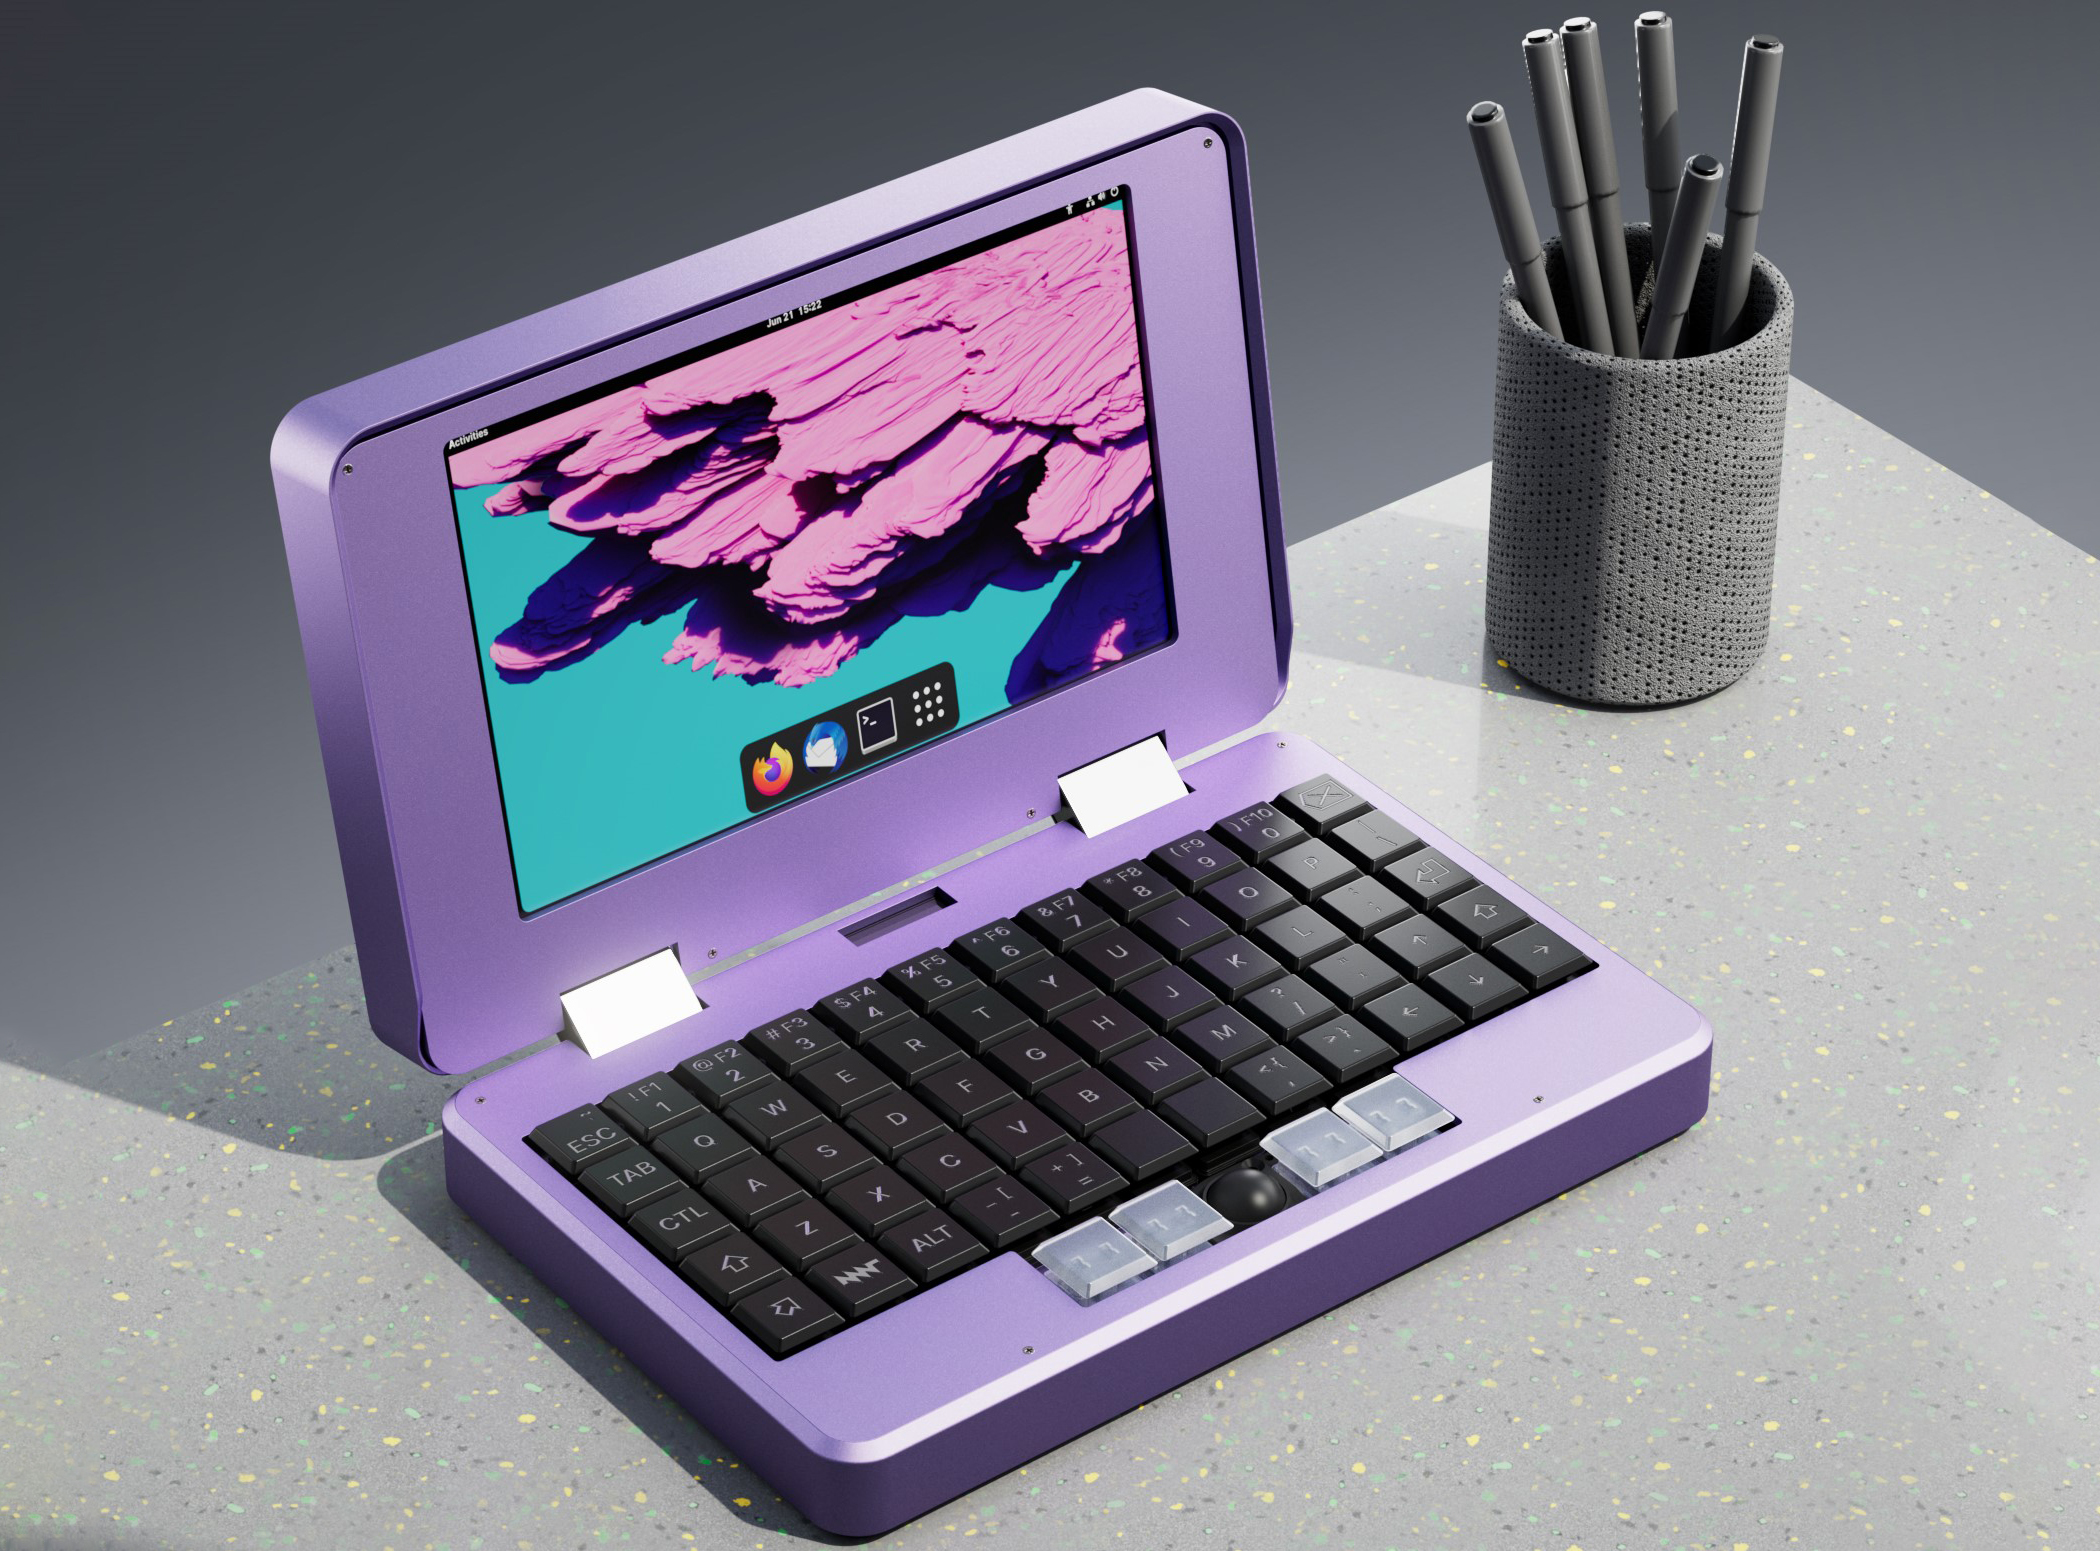 MNT's Pocket Reform modular mini laptop coming soon with ARMbased